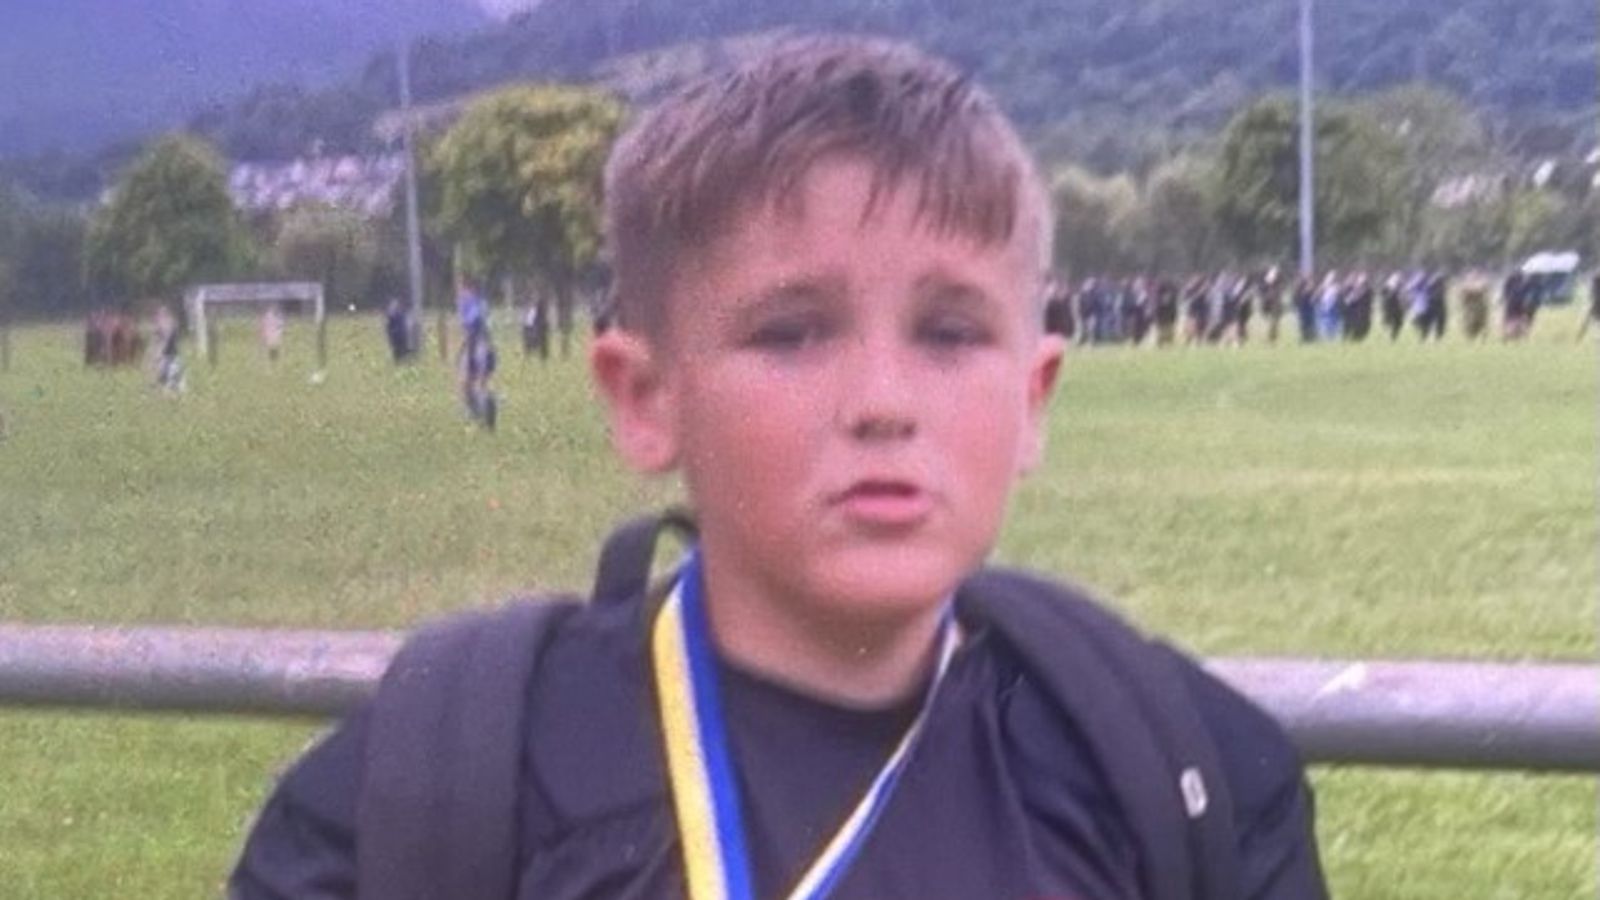 Kaylan Hippsley: Boy, 13, who died after crash will be 'missed beyond measure', says family